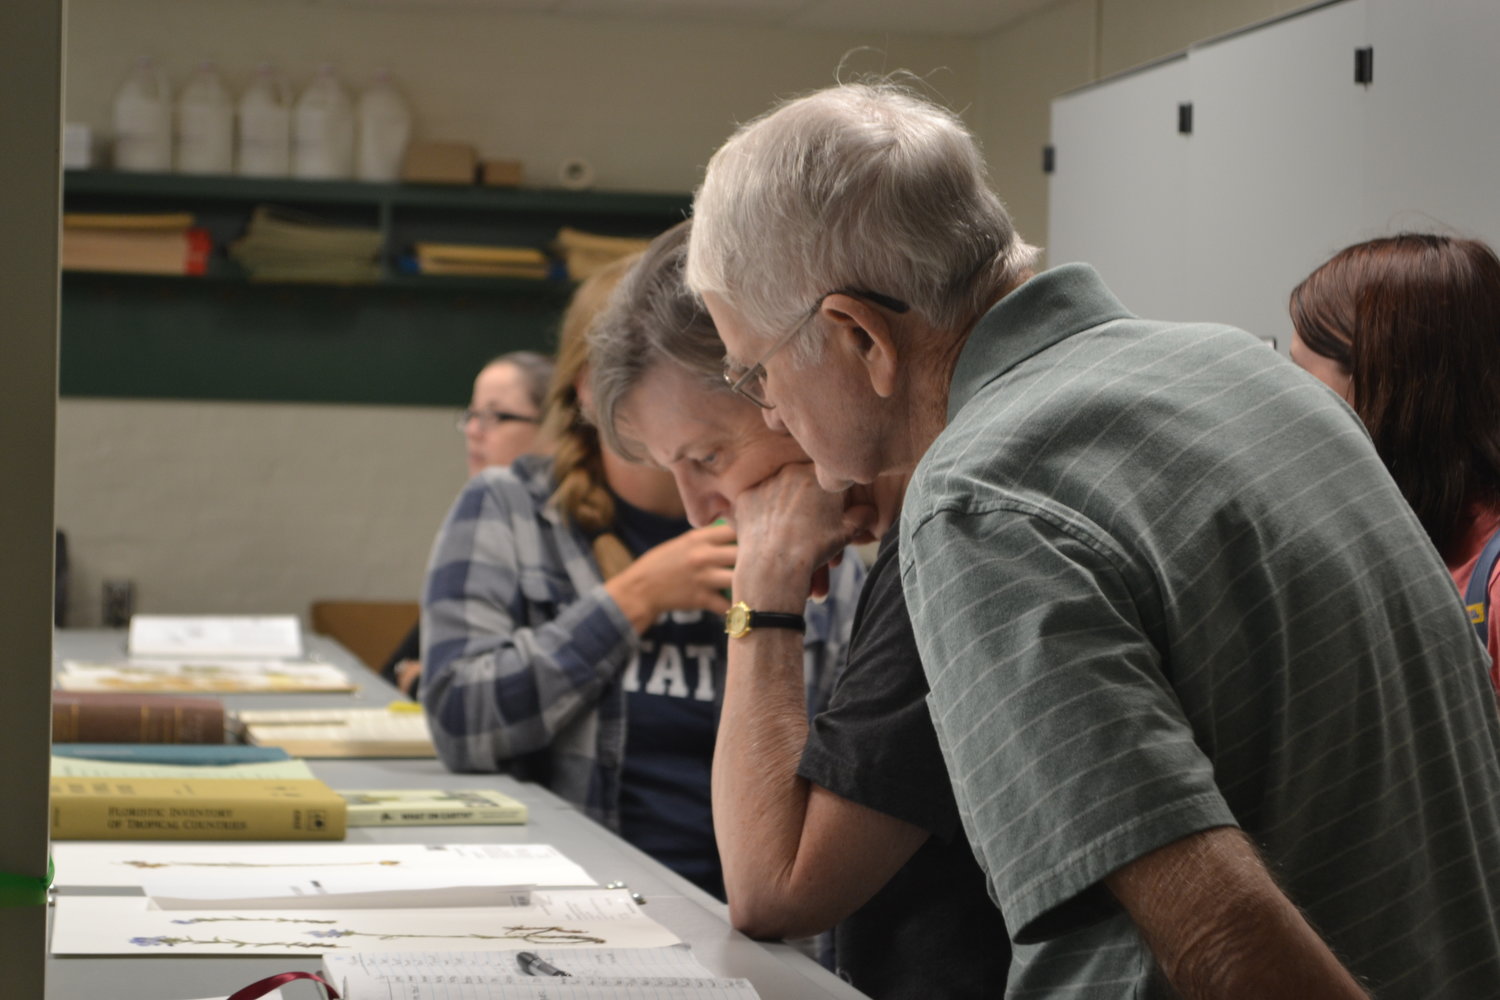 Local residents Diana Brooks, left, and Burl Brooks look at some of the featured plants during the Sperry Herbarium Open House in Hartman Hall at Pittsburg State University on Friday.